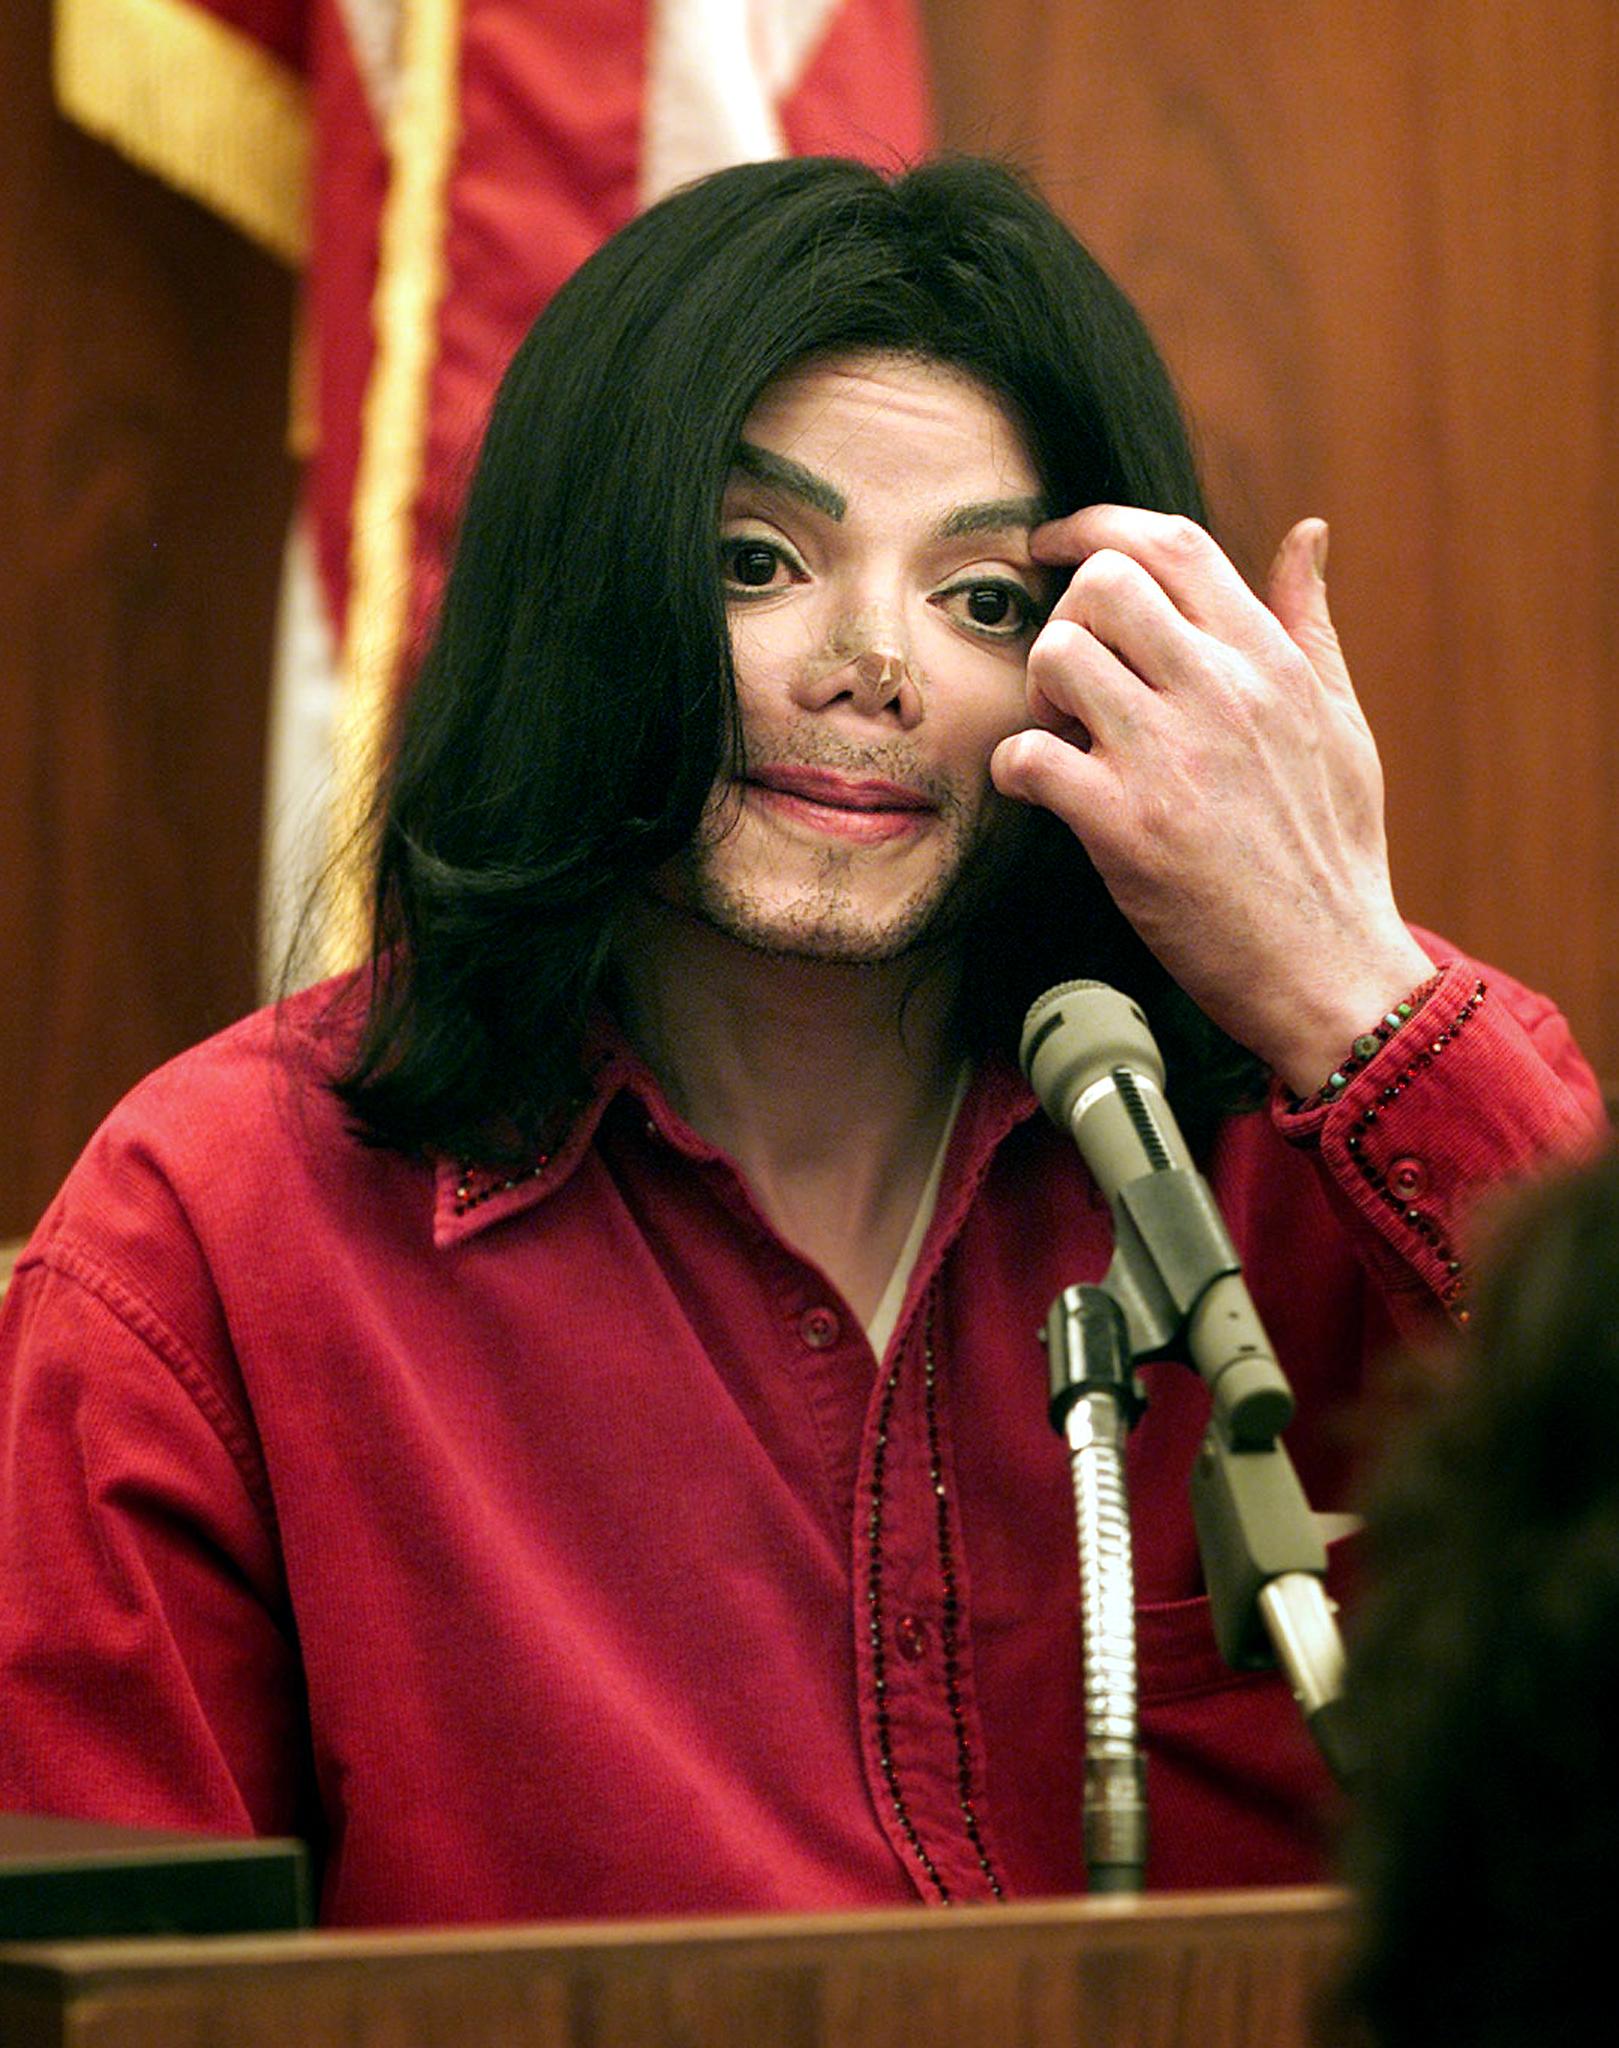 Michael Jackson at the Santa Maria Superior Court in 2002 | Source: Getty Images